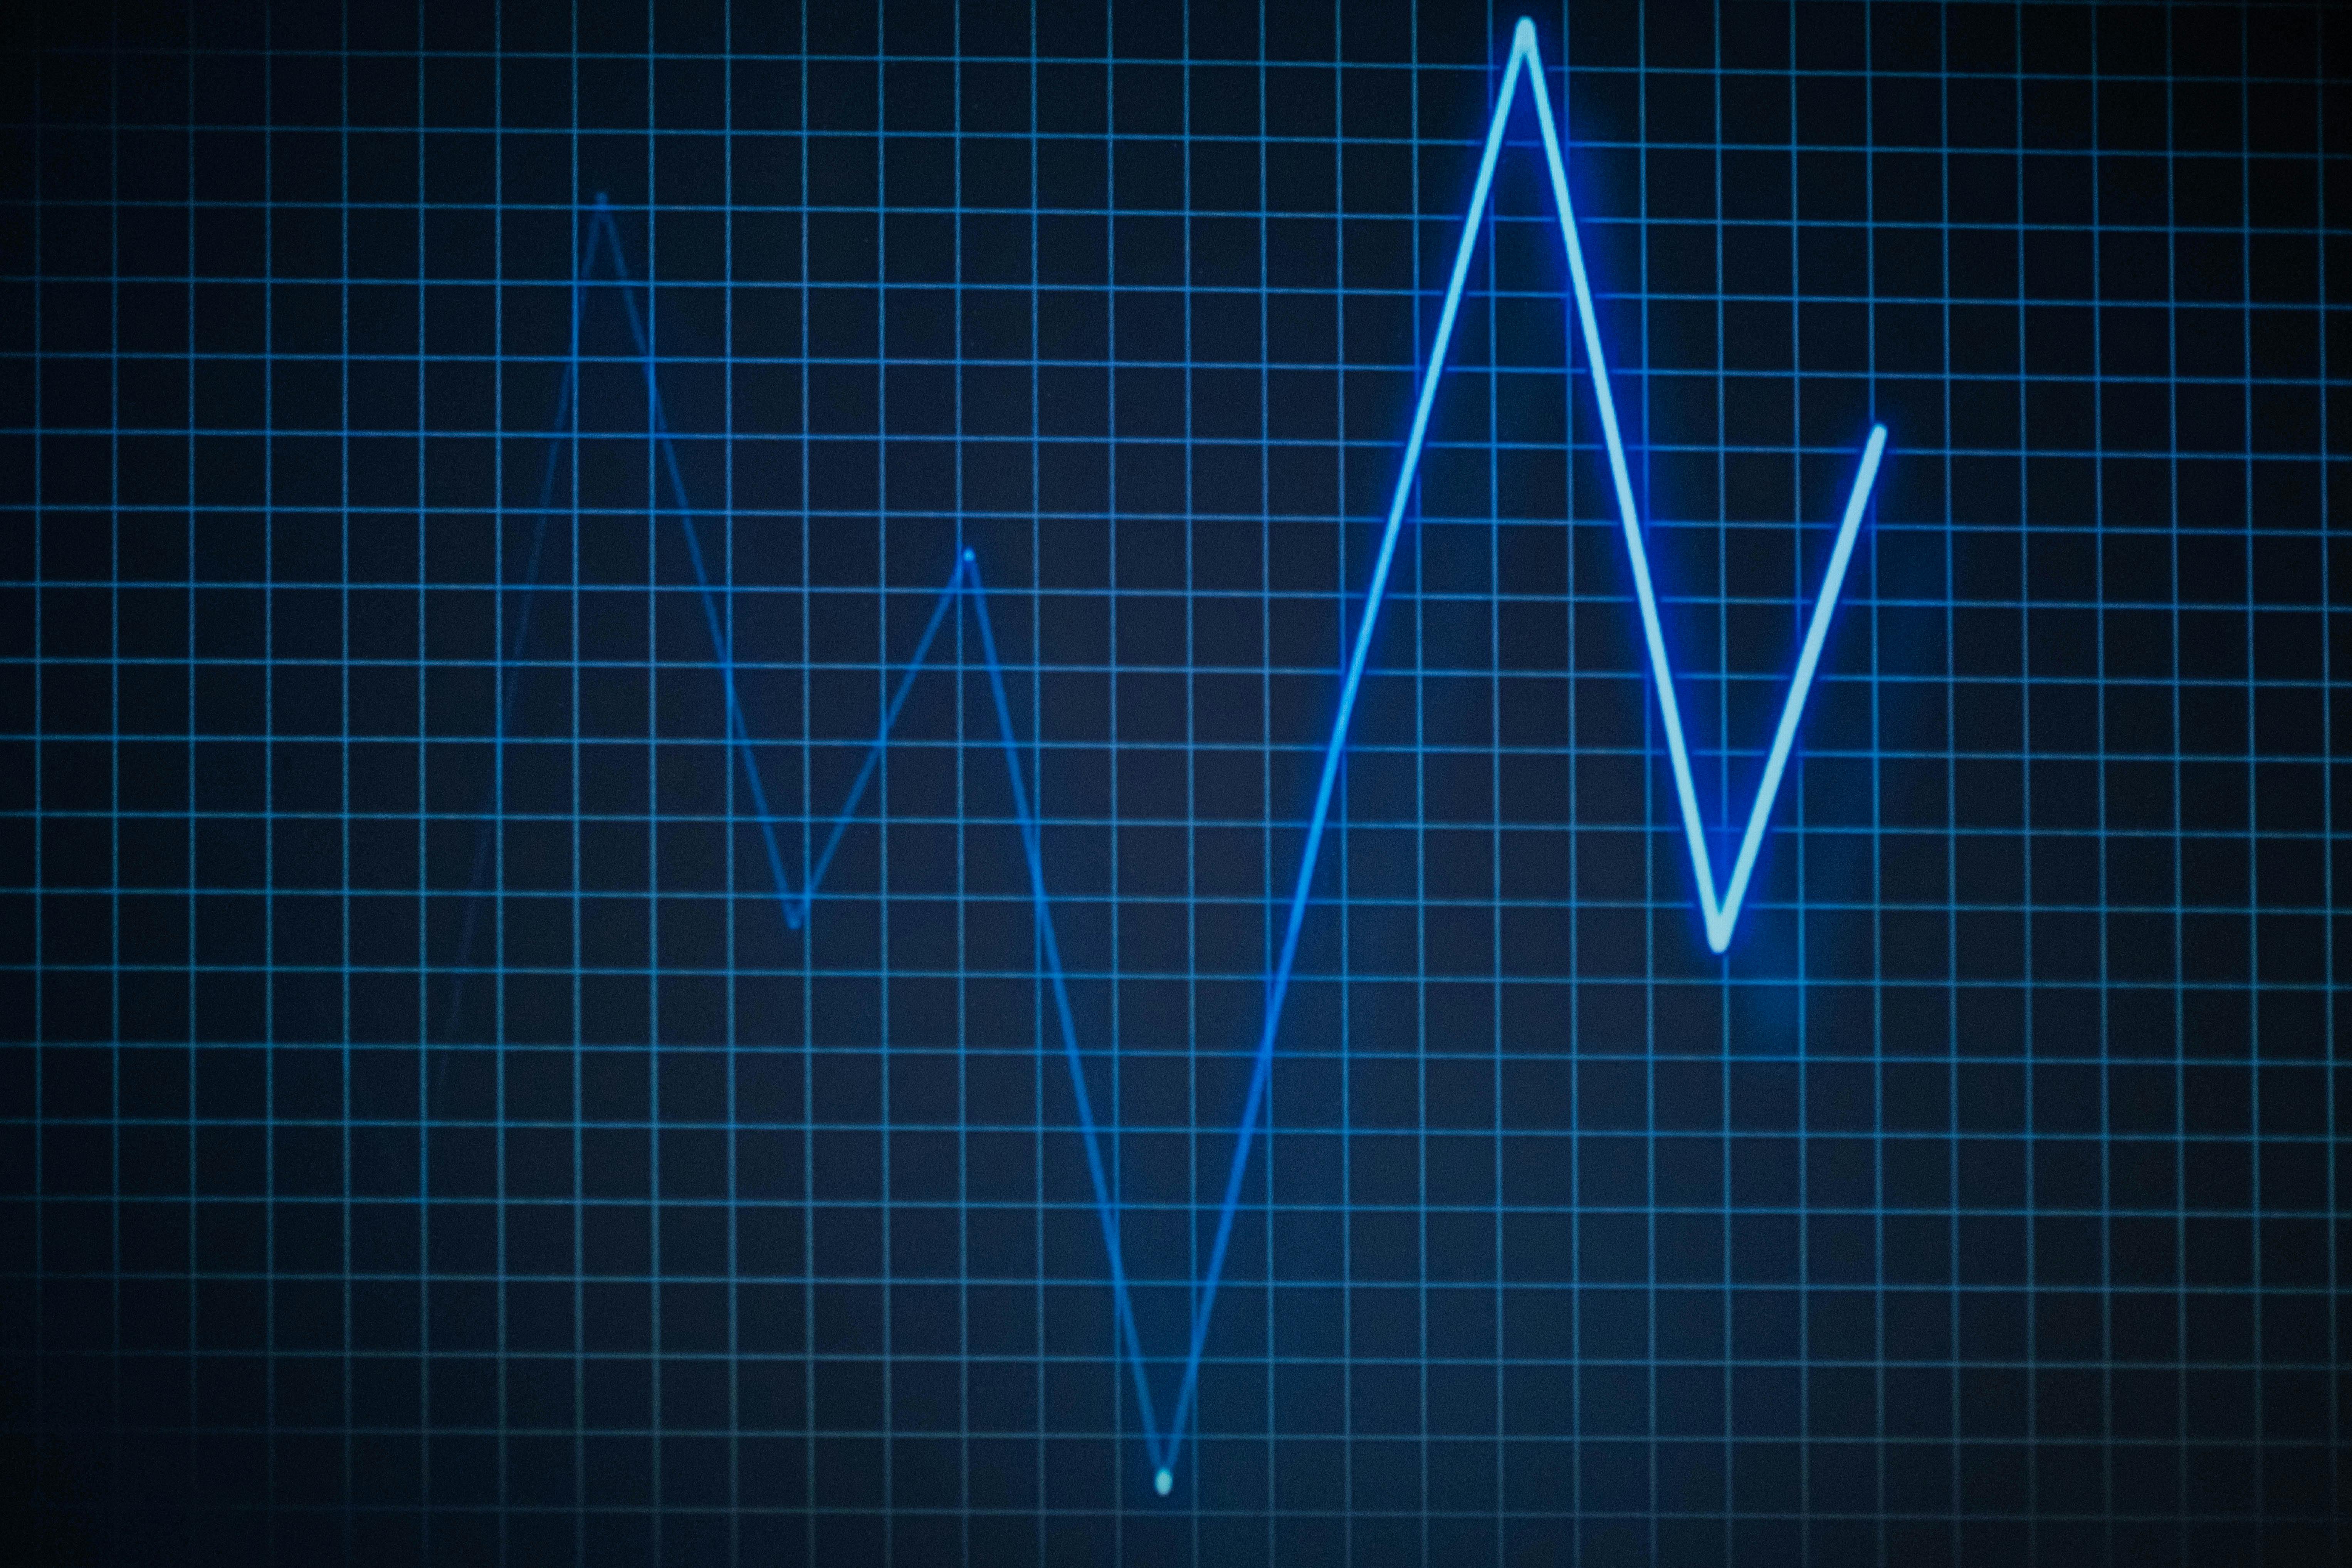 Ecg Photos, Download The BEST Free Ecg Stock Photos & HD Images